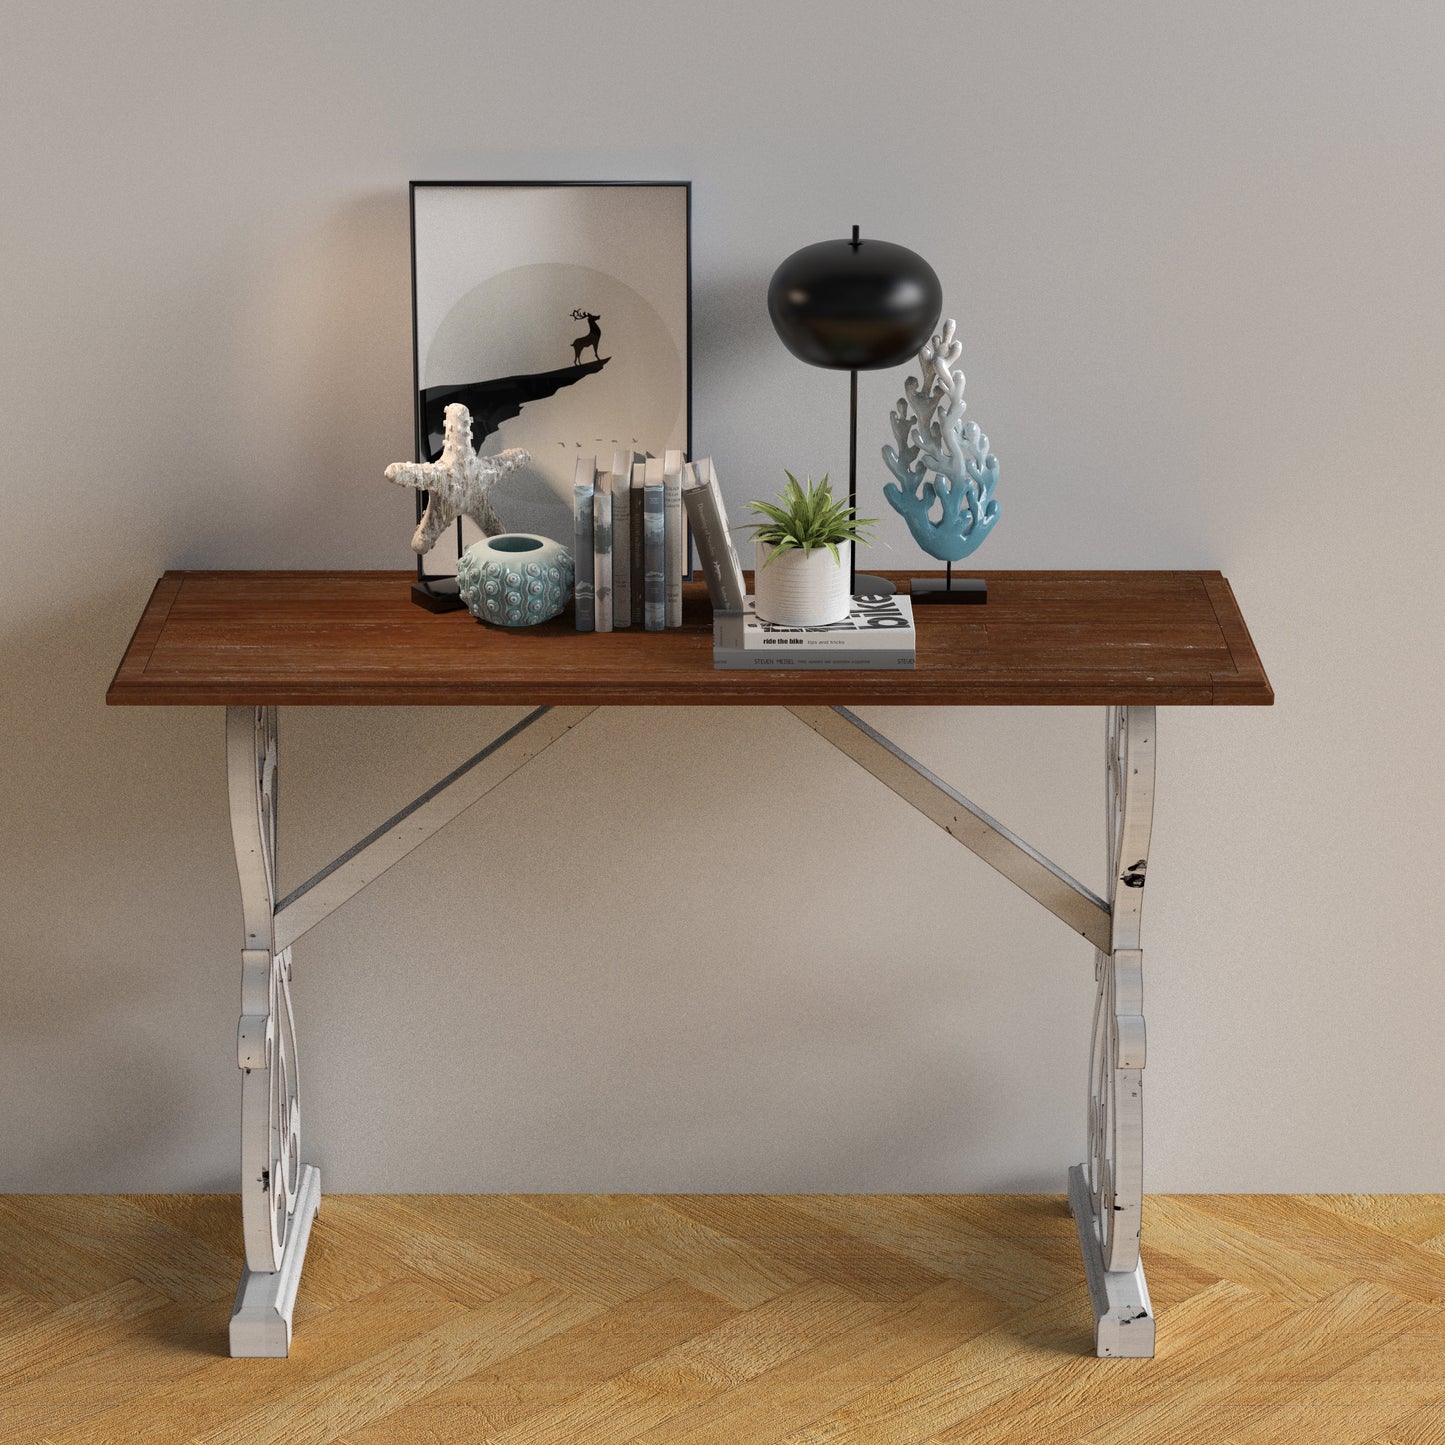 Solid Wood Baxter Console Table, Distressed White and Natural